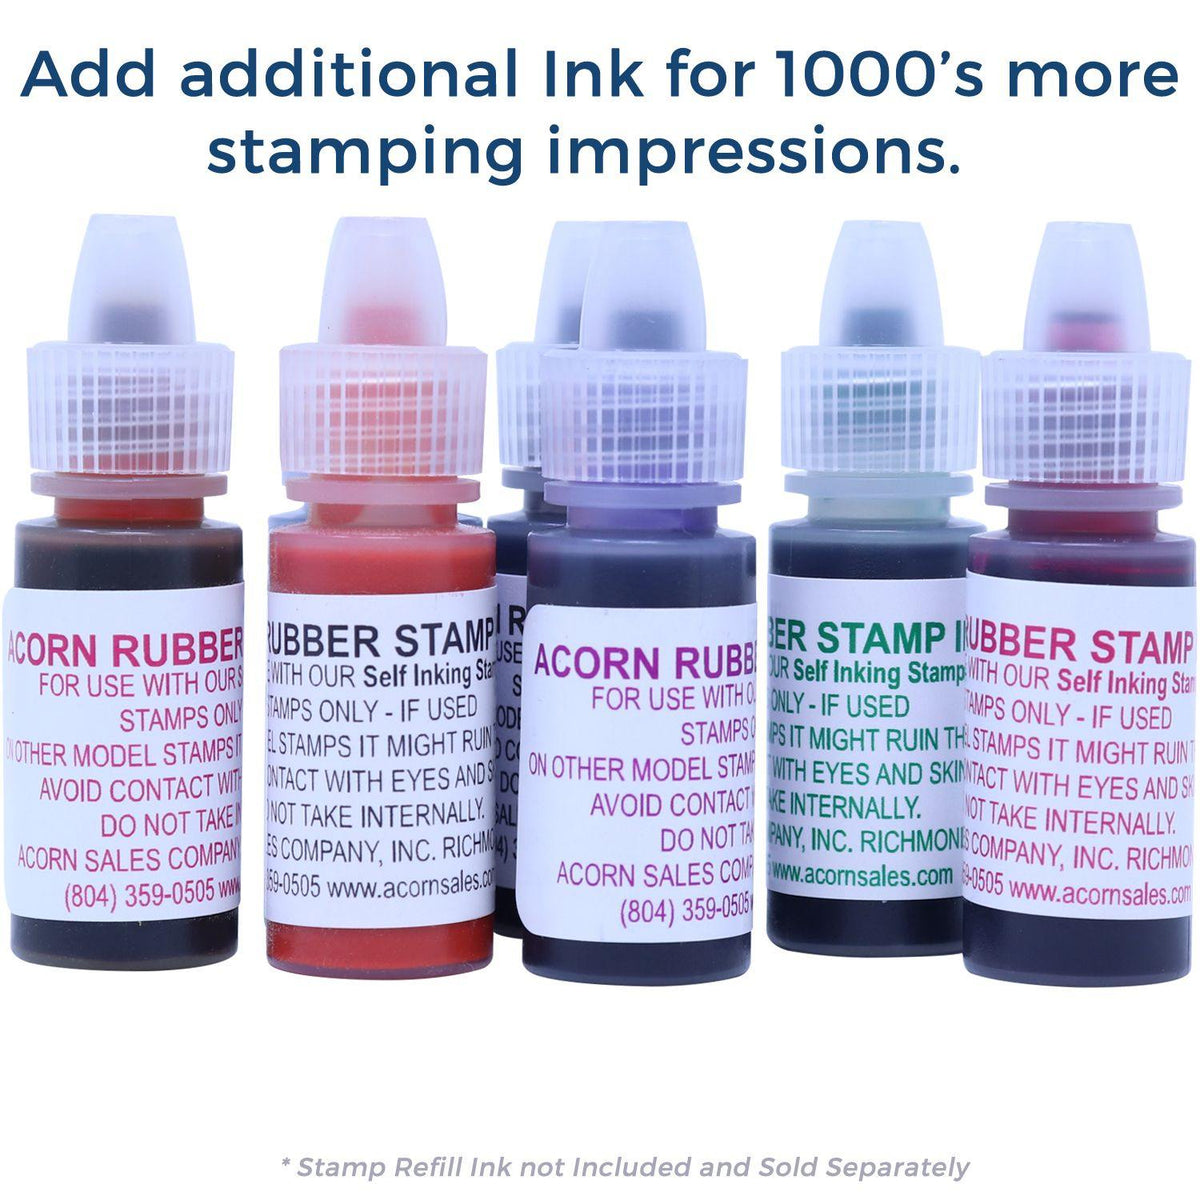 Refill Inks for Large Pre-Inked Times Faxed with Line Stamp Available